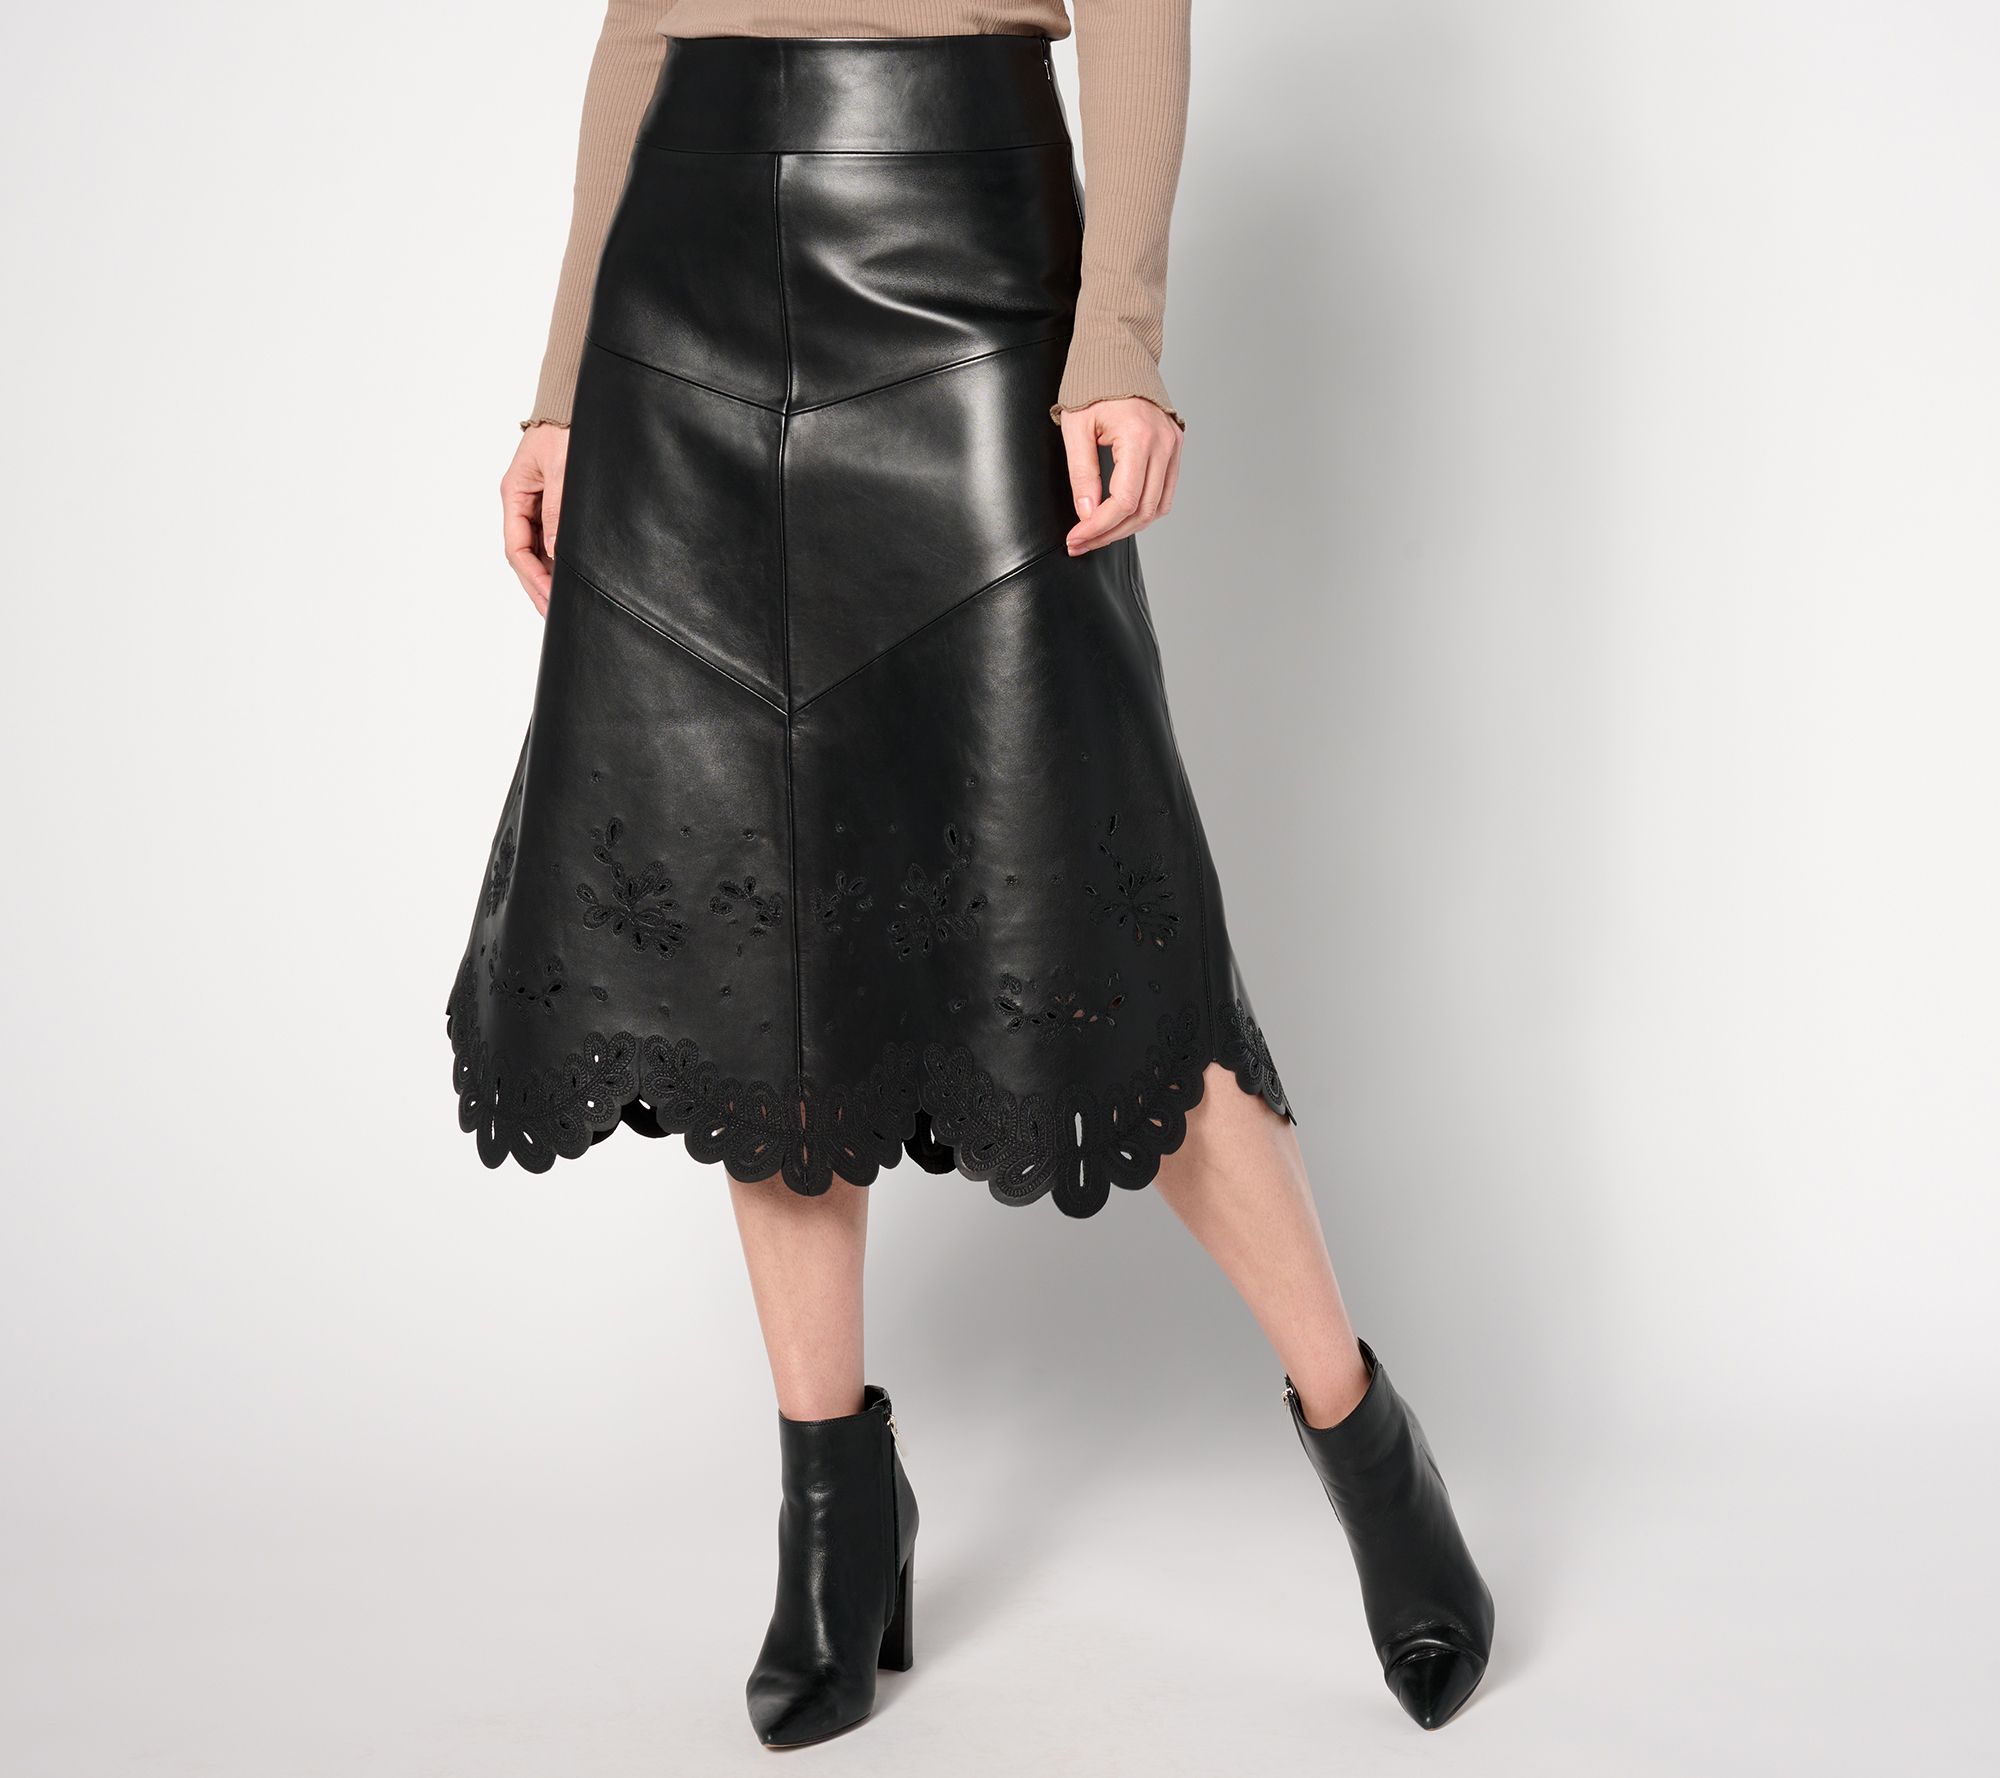 American Leather Co. Regular Leather Midi Skirt with Scalloped Hem 